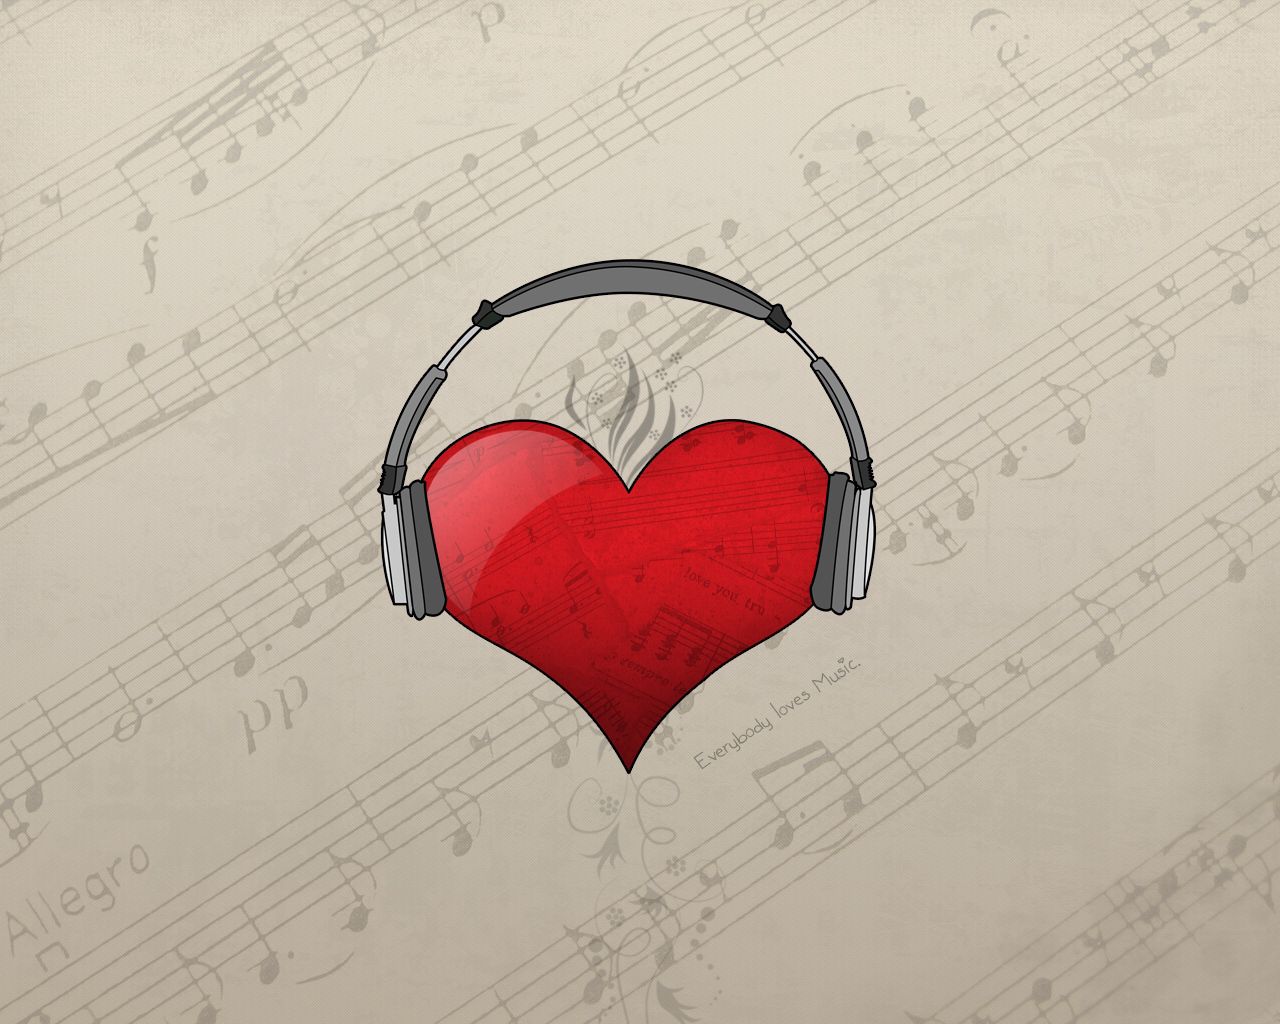 headphones, love, red, picture, drawing, heart